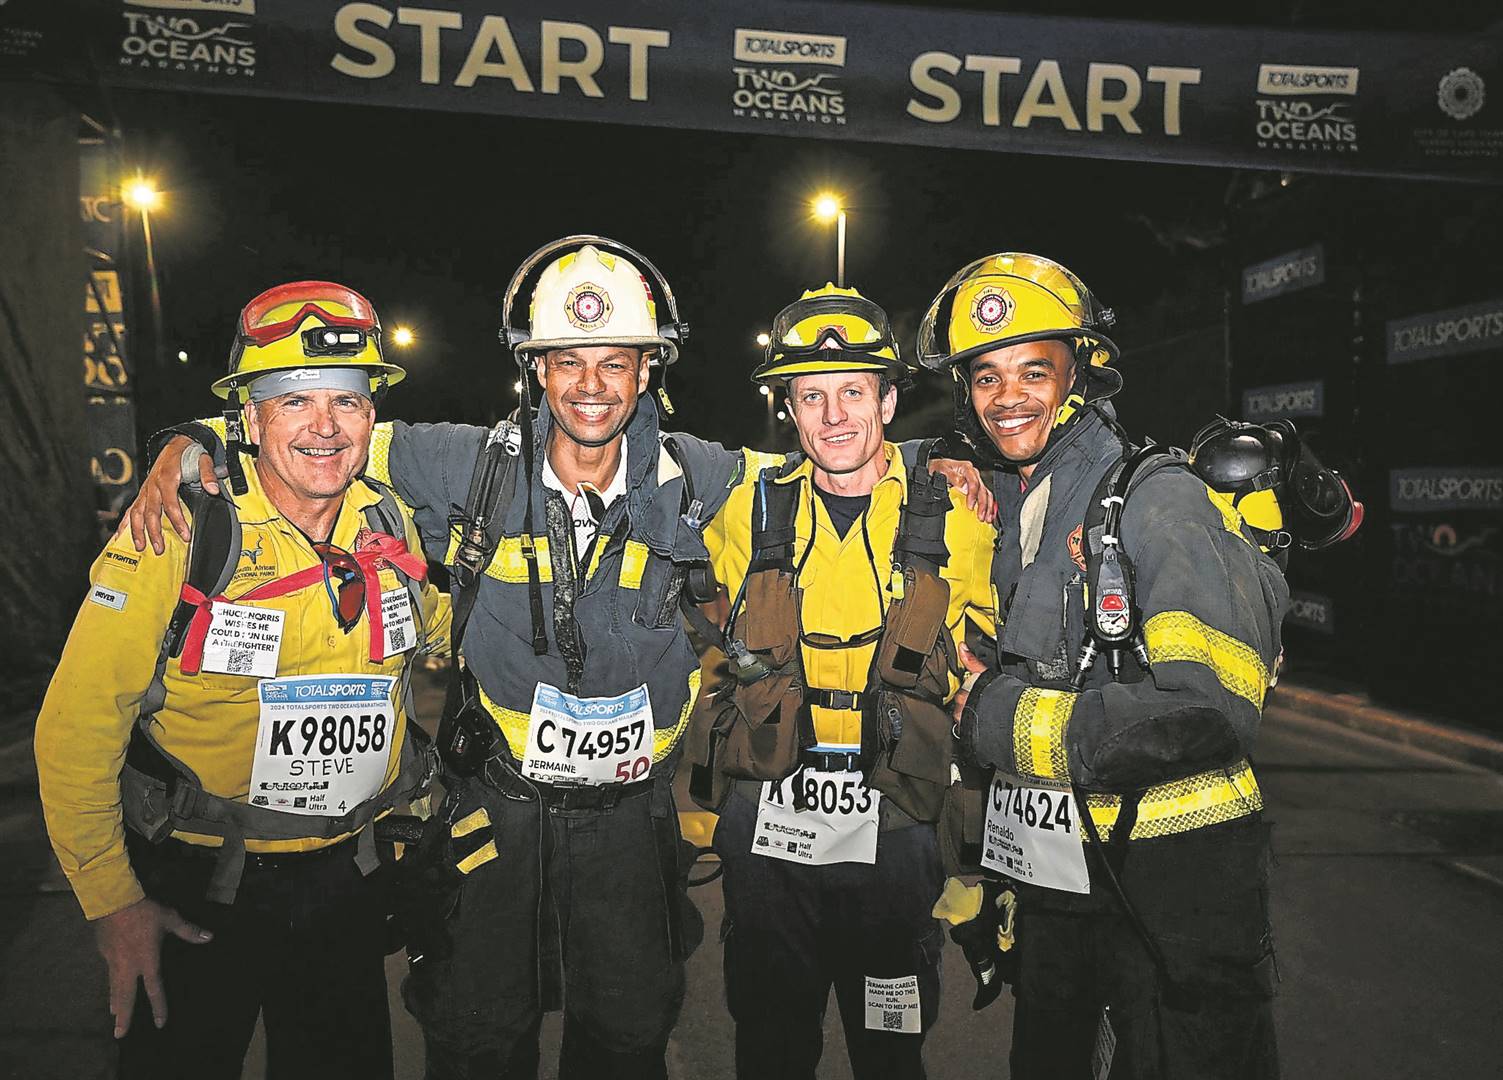 Helderberg firefighters Jermaine Carelse (second from left) and Renaldo Duncan (far right), and their Volunteer Wildfire Services (VWS) counterparts Liam Gannon and Steve Akester finished this past weekend’s Two Oceans half-marathon in just two hours and 46 minutes, to raise funds for the VWS. Sharing their reflections on the race, they darted from the starting line together and crossed the finish line together. It is a remarkable feat, considering the weight they were carrying, not to mention their modest aspiration to just “finish” the race before the cut-off time of three hours and 30 minutes. “We are all incredibly proud of these firefighters who have not just walked the talk, but run it too,” read a statement by the City of Cape Town. “They have once again shone a spotlight on the incredibly tough job that firefighting is, and what is required, but also the very good work that the VWS does alongside its City and TMNP counterparts each year to combat the many wildfires that Cape Town is prone to.” While the group has completed the mission, members of the public can still make donations to VWS to support their work and praise the runners for their heroism. Donations can be made directly through the VWS website, www.vws.org.za o